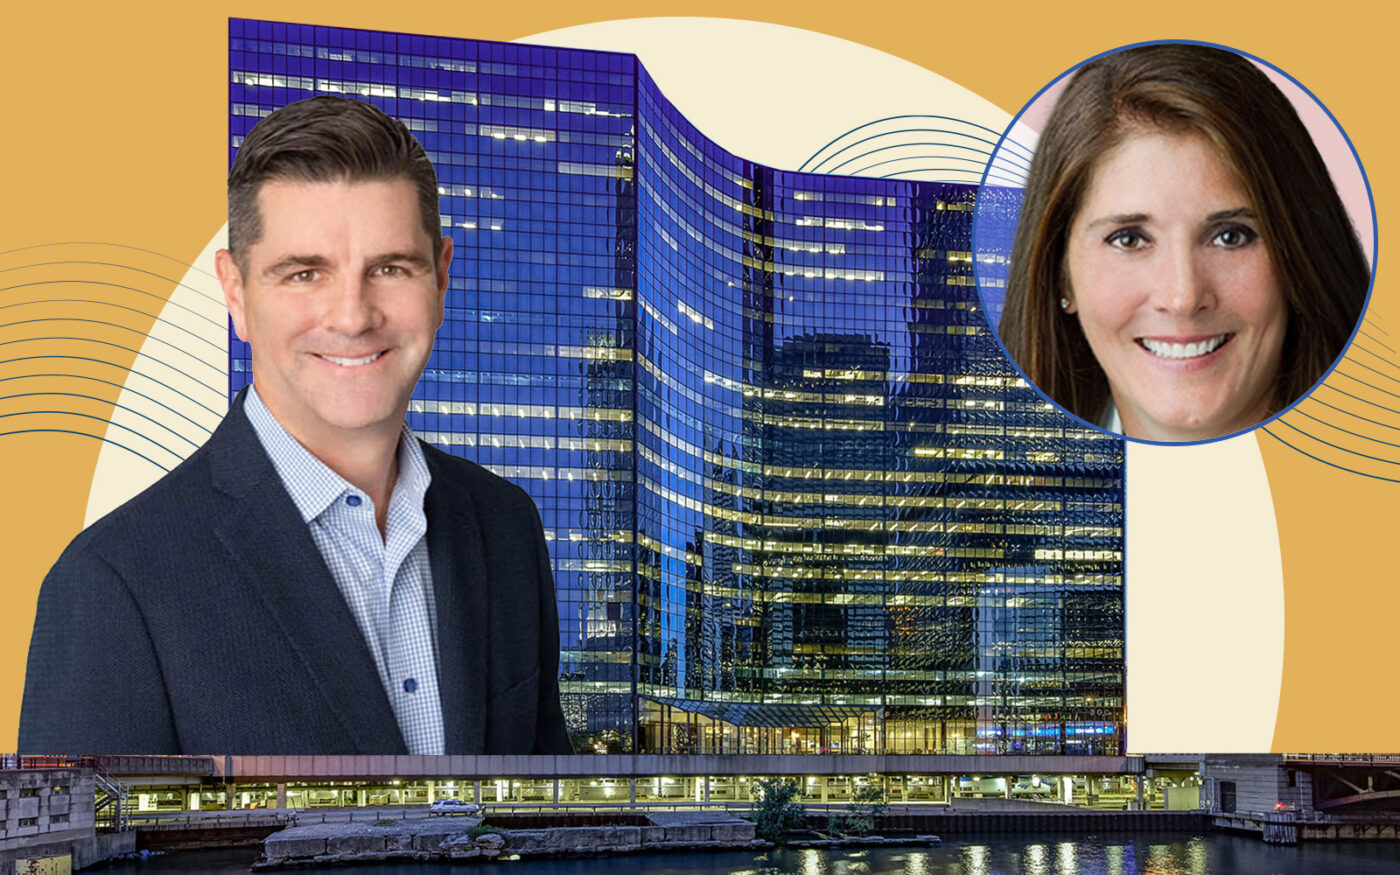 300 S. Riverside Plaza in Chicago with CBRE's Bill Sheehy and Lisa Konieczka